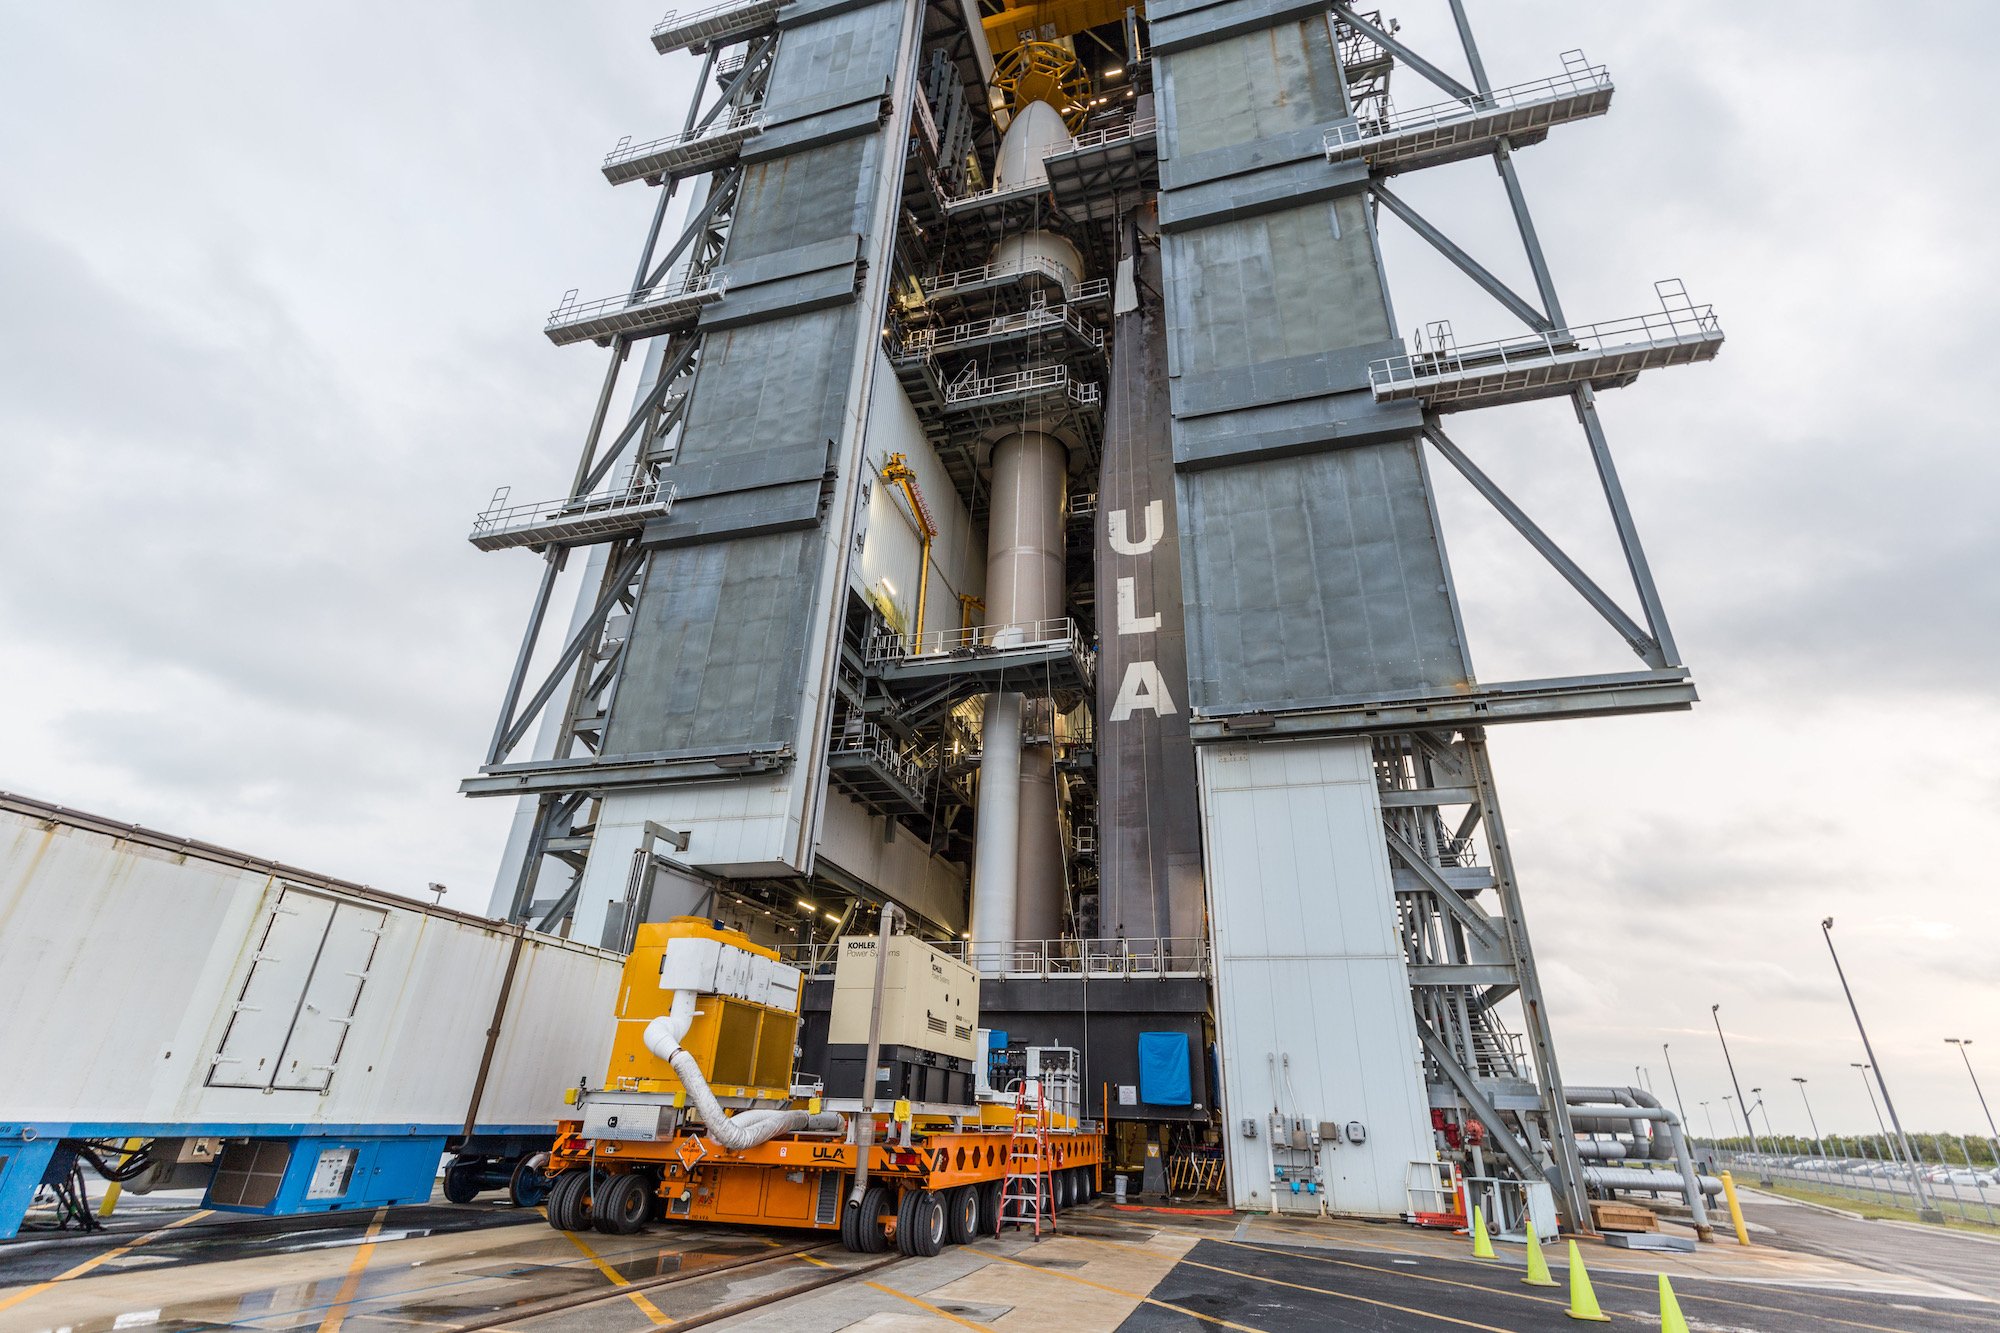 The Atlas V 511 rocket stands fully assembled for launch. Photo by United Launch Alliance